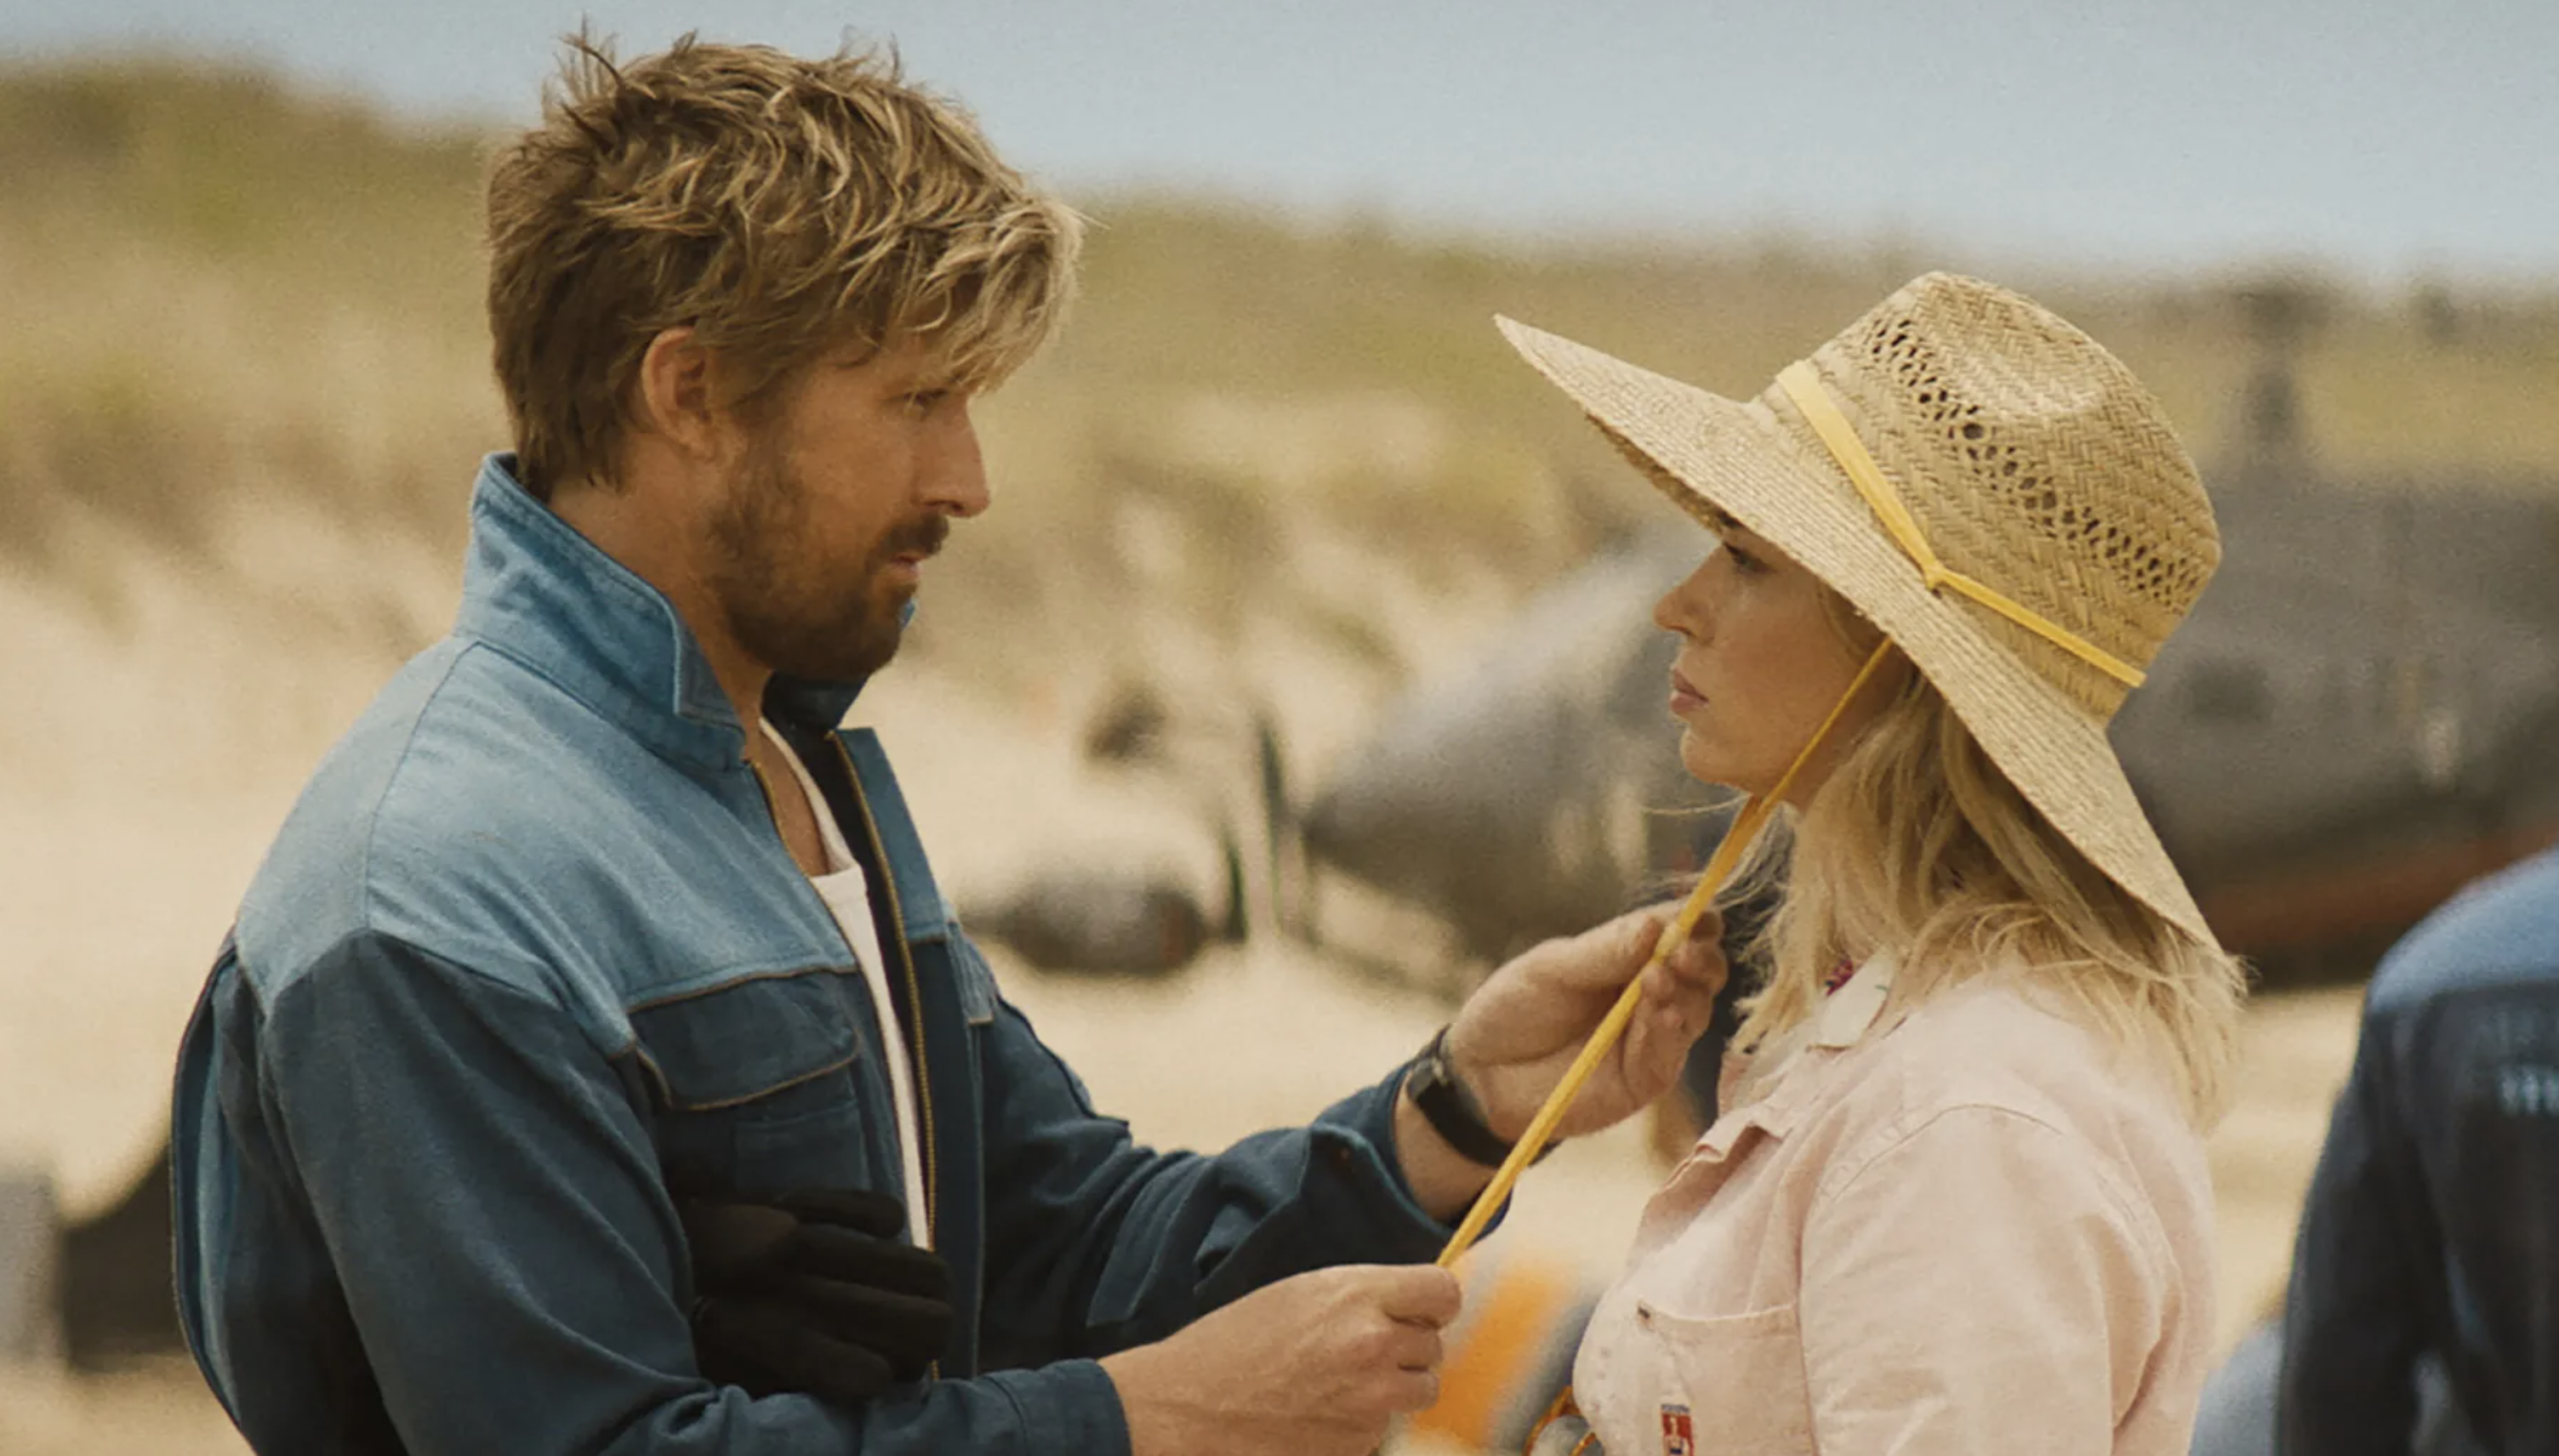 Man in denim jacket talking to woman in straw hat and pastel shirt on beach setting